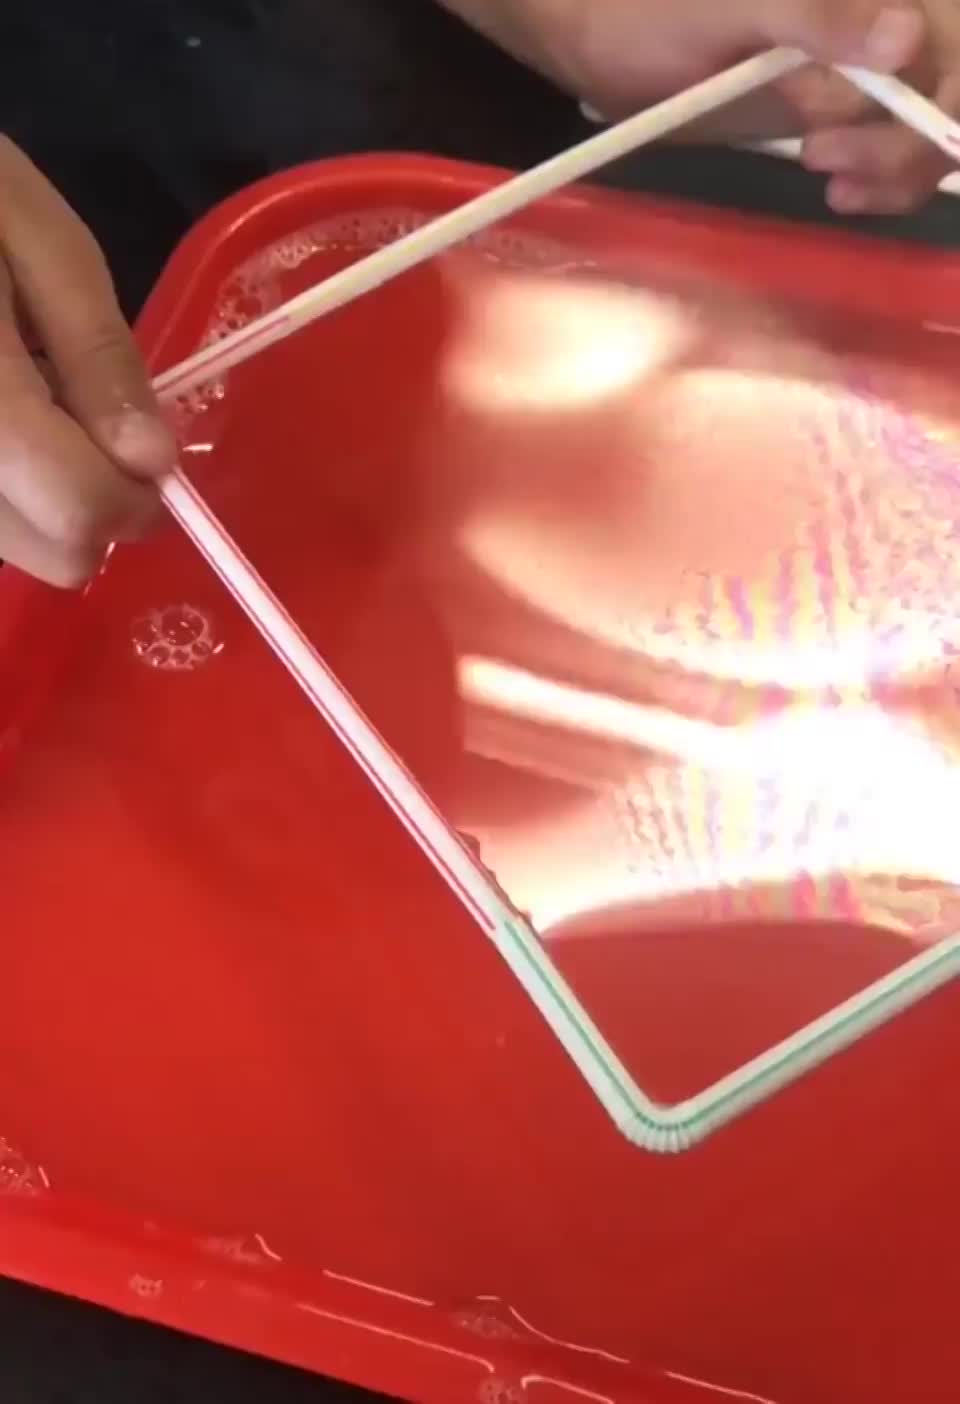 Surface tension pulls the thread into a perfect circle